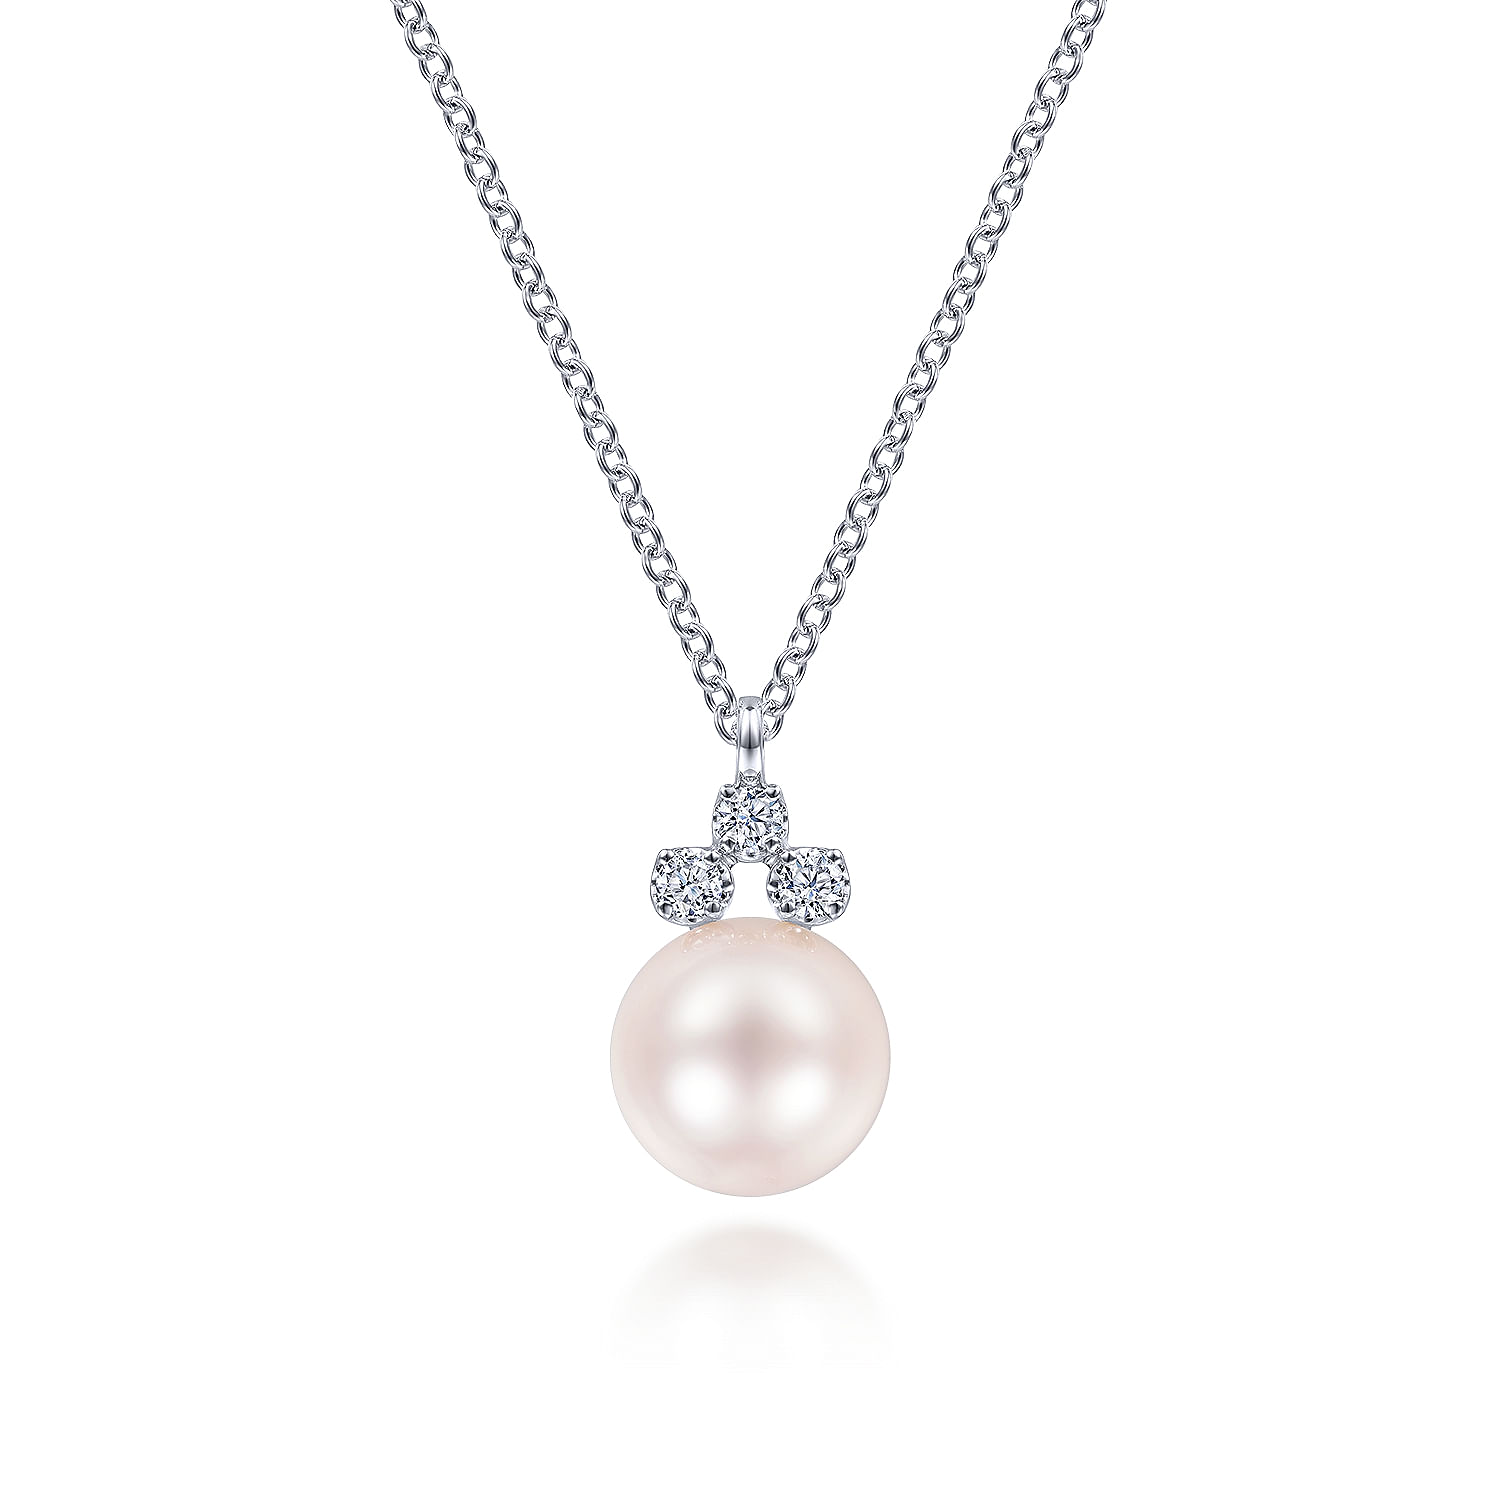 14K White Gold Diamond and Pearl Pendant Necklace